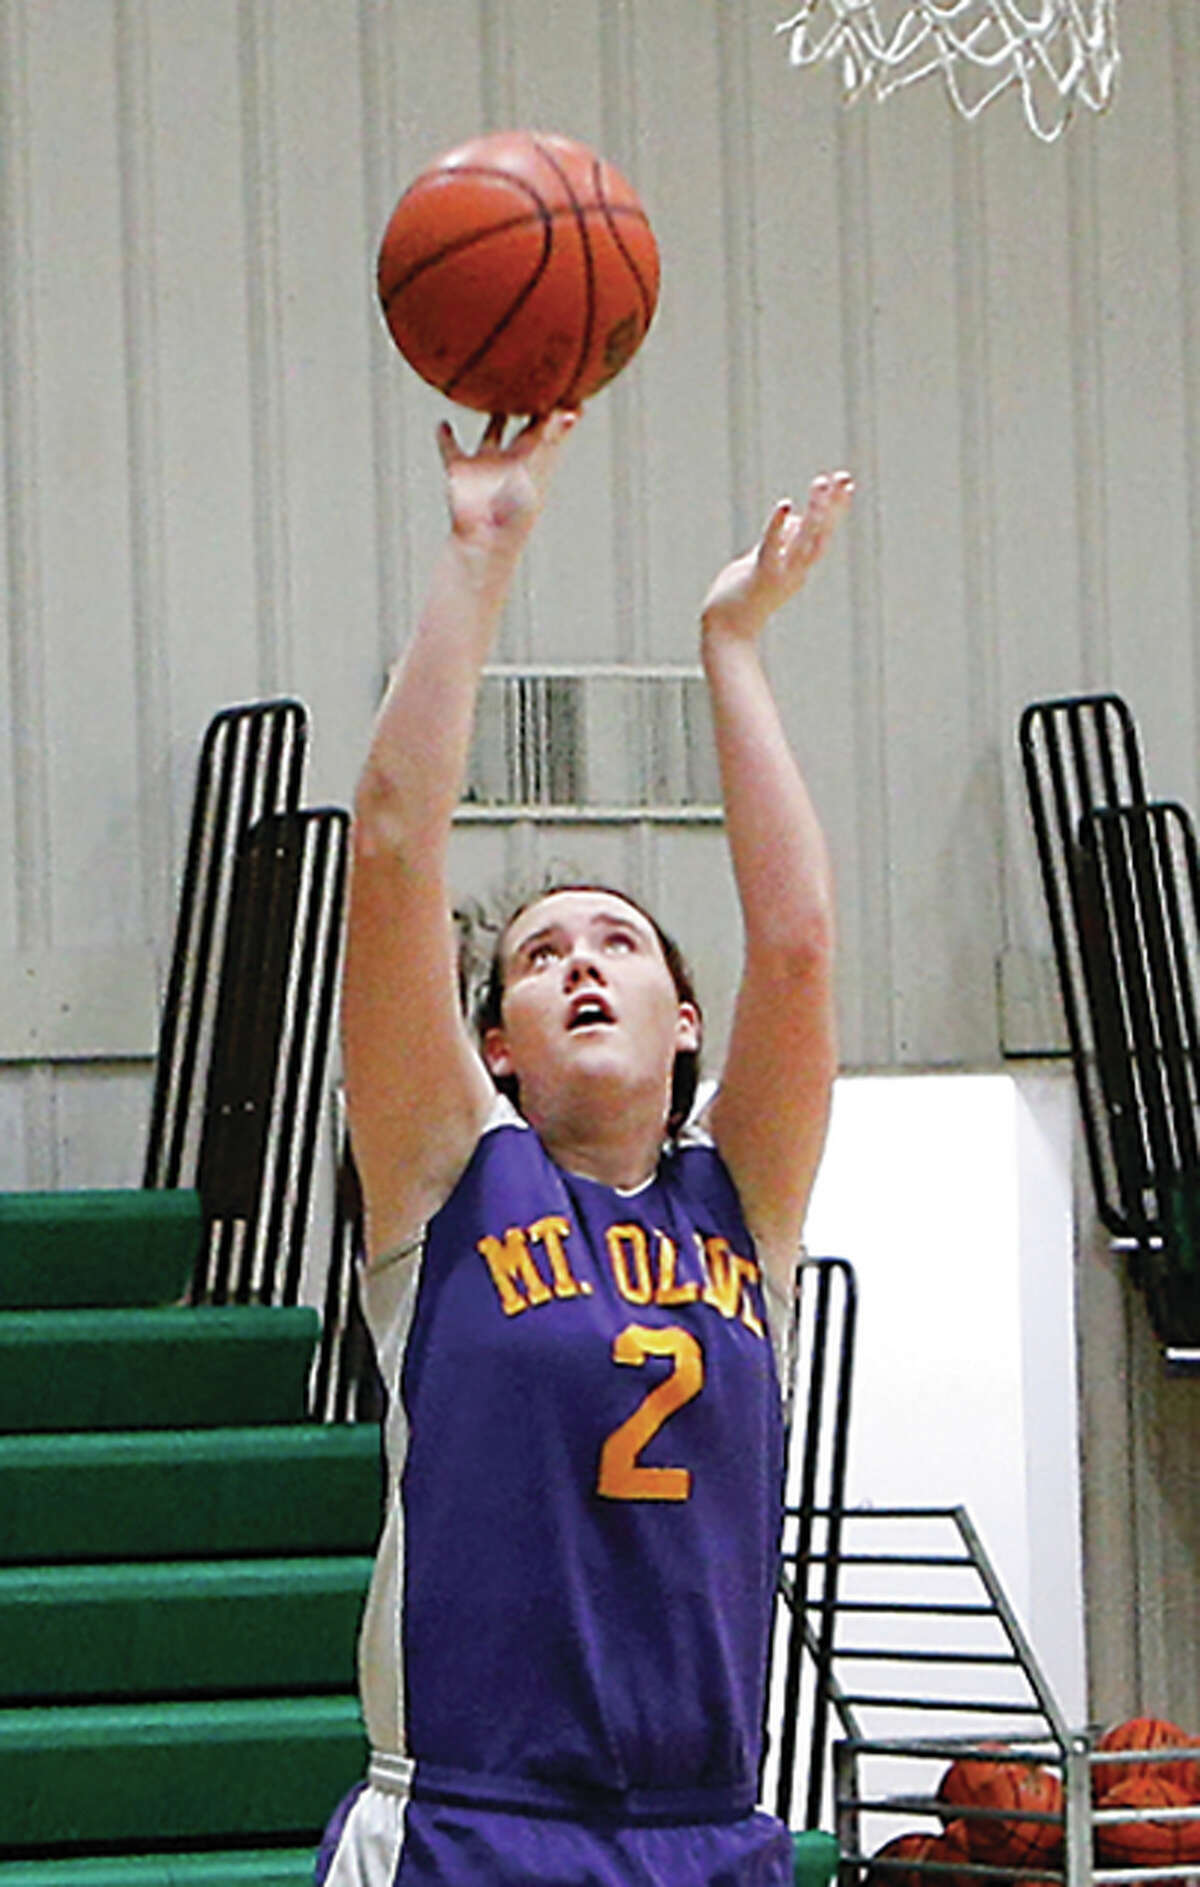 Mount Olive’s Brianna Henke, shown scoring on a layup in a Wildcats win Jan. 4 at Metro East Lutheran in Edwardsville, scored 26 points Wednesday night in a victory over Brussels in Mount Olive.